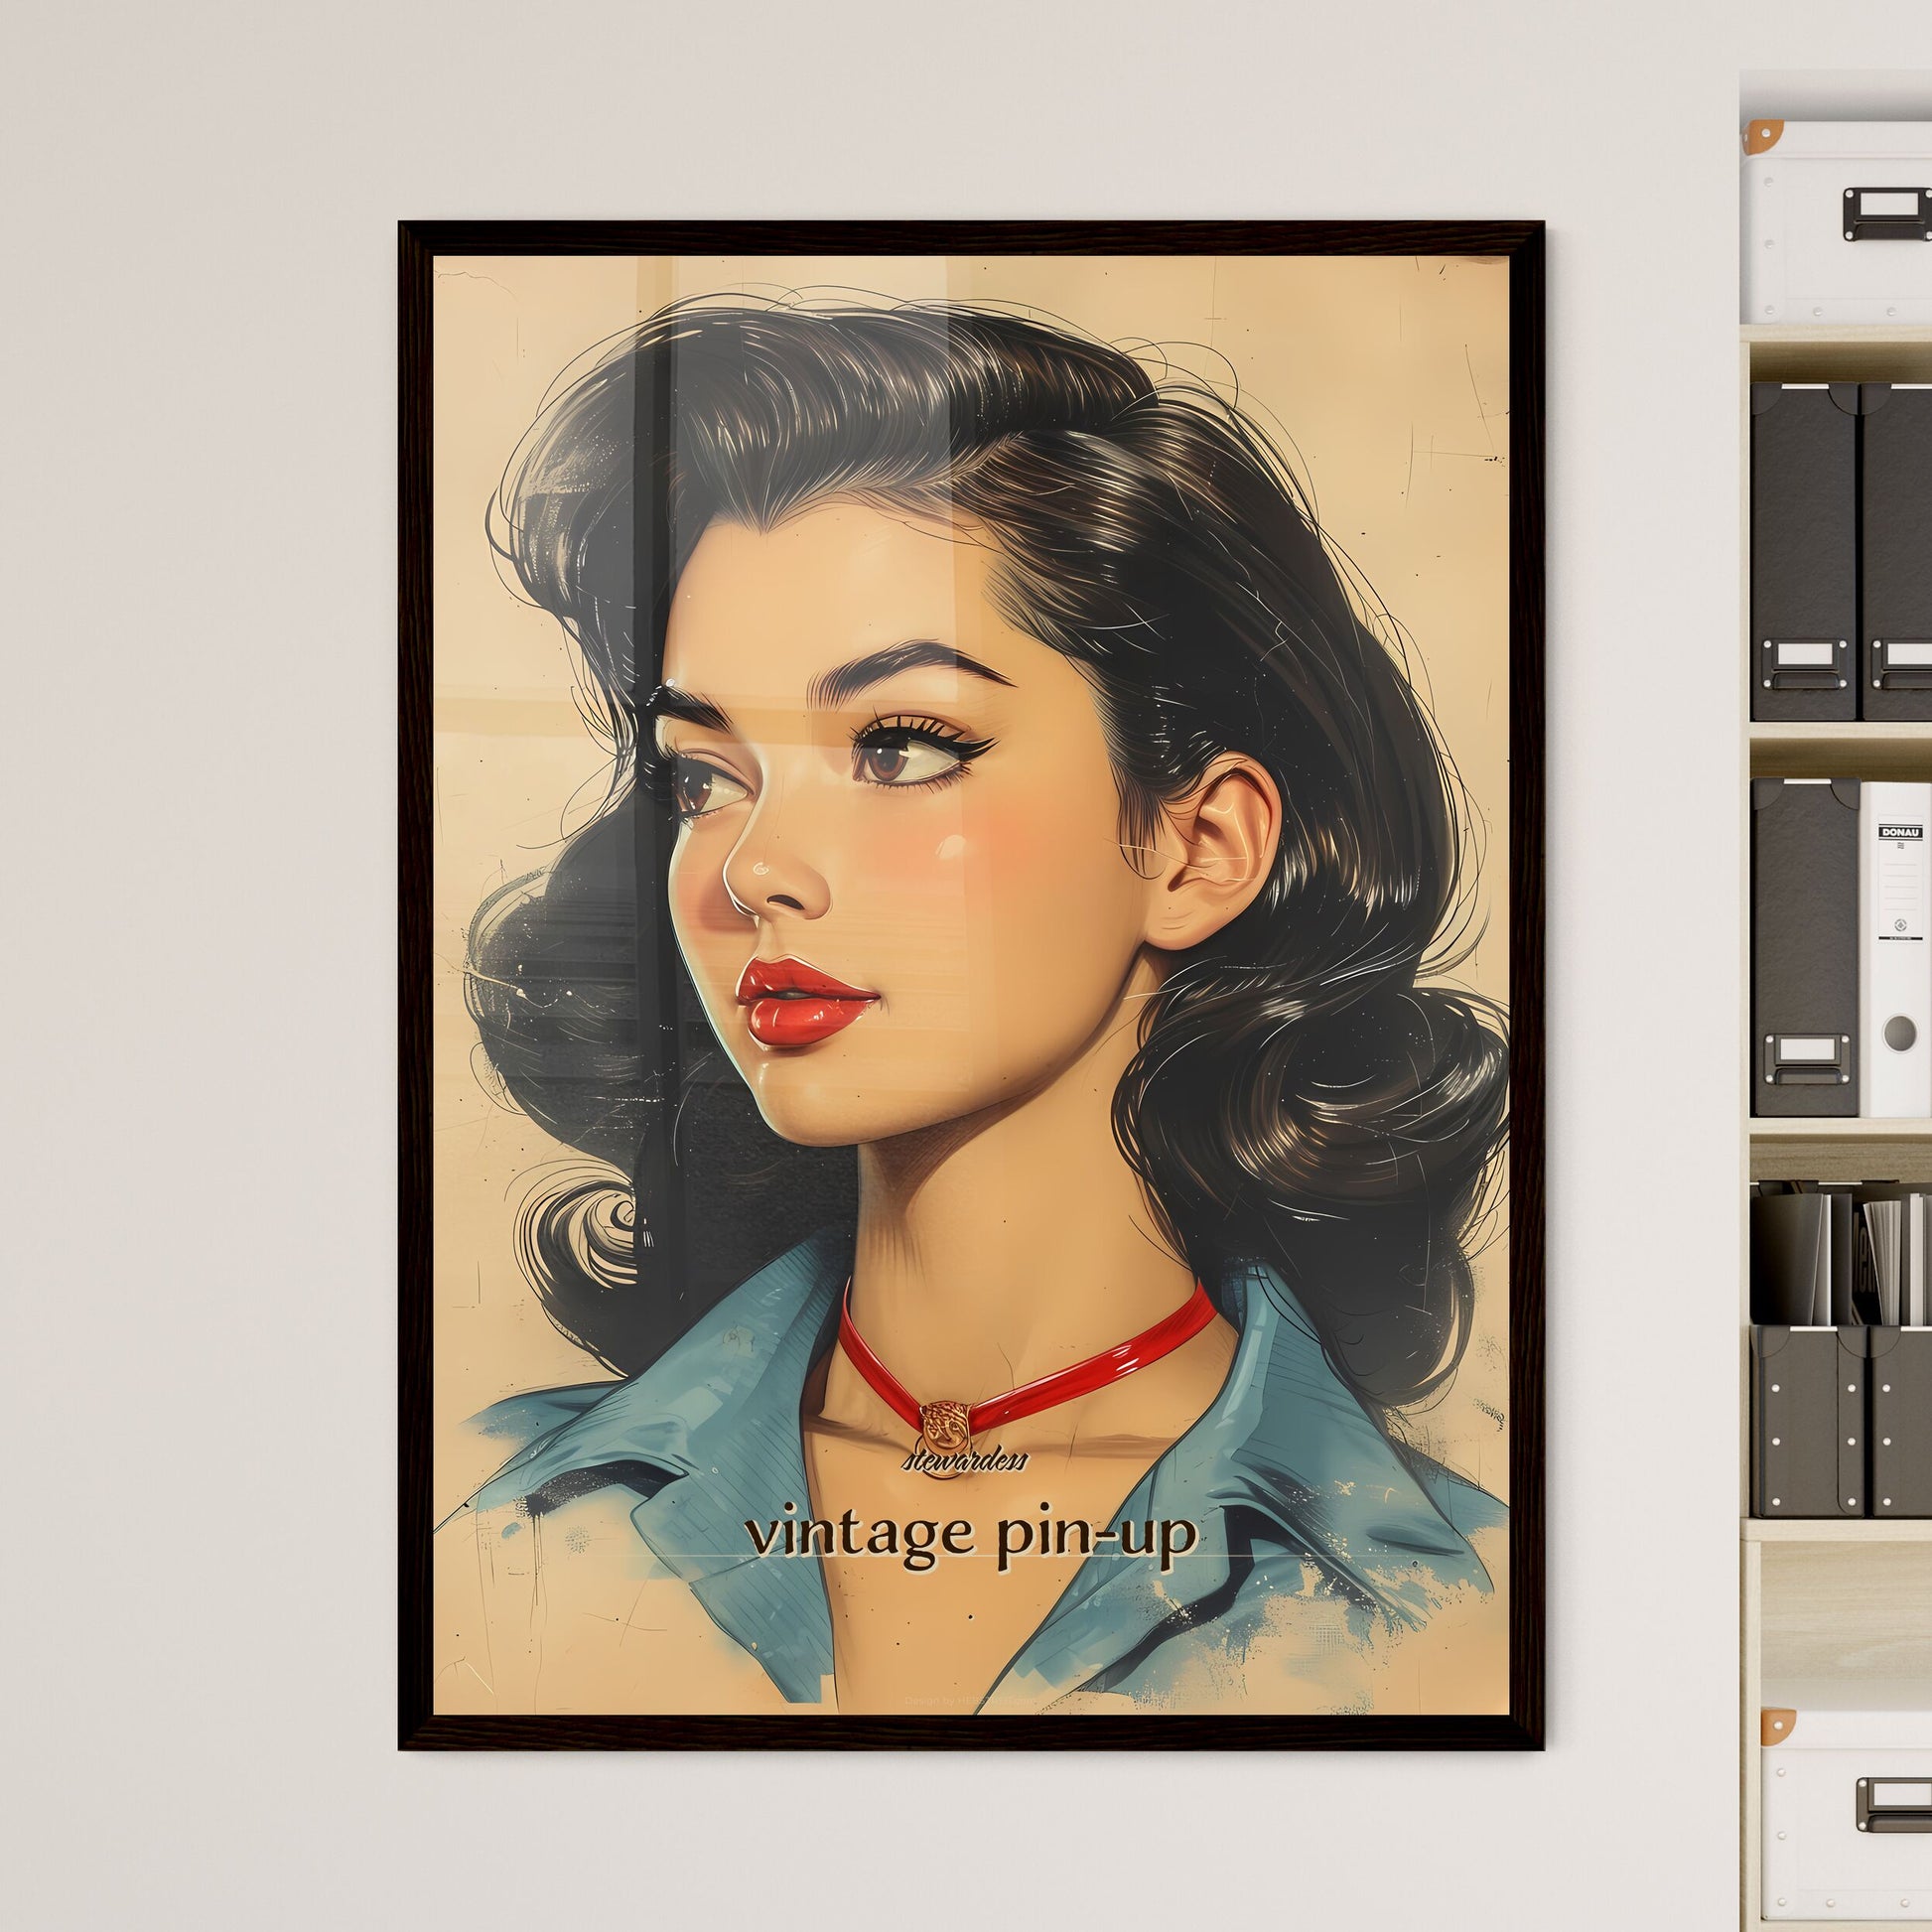 stewardess, vintage pin-up, A Poster of a woman with long black hair and red necklace Default Title